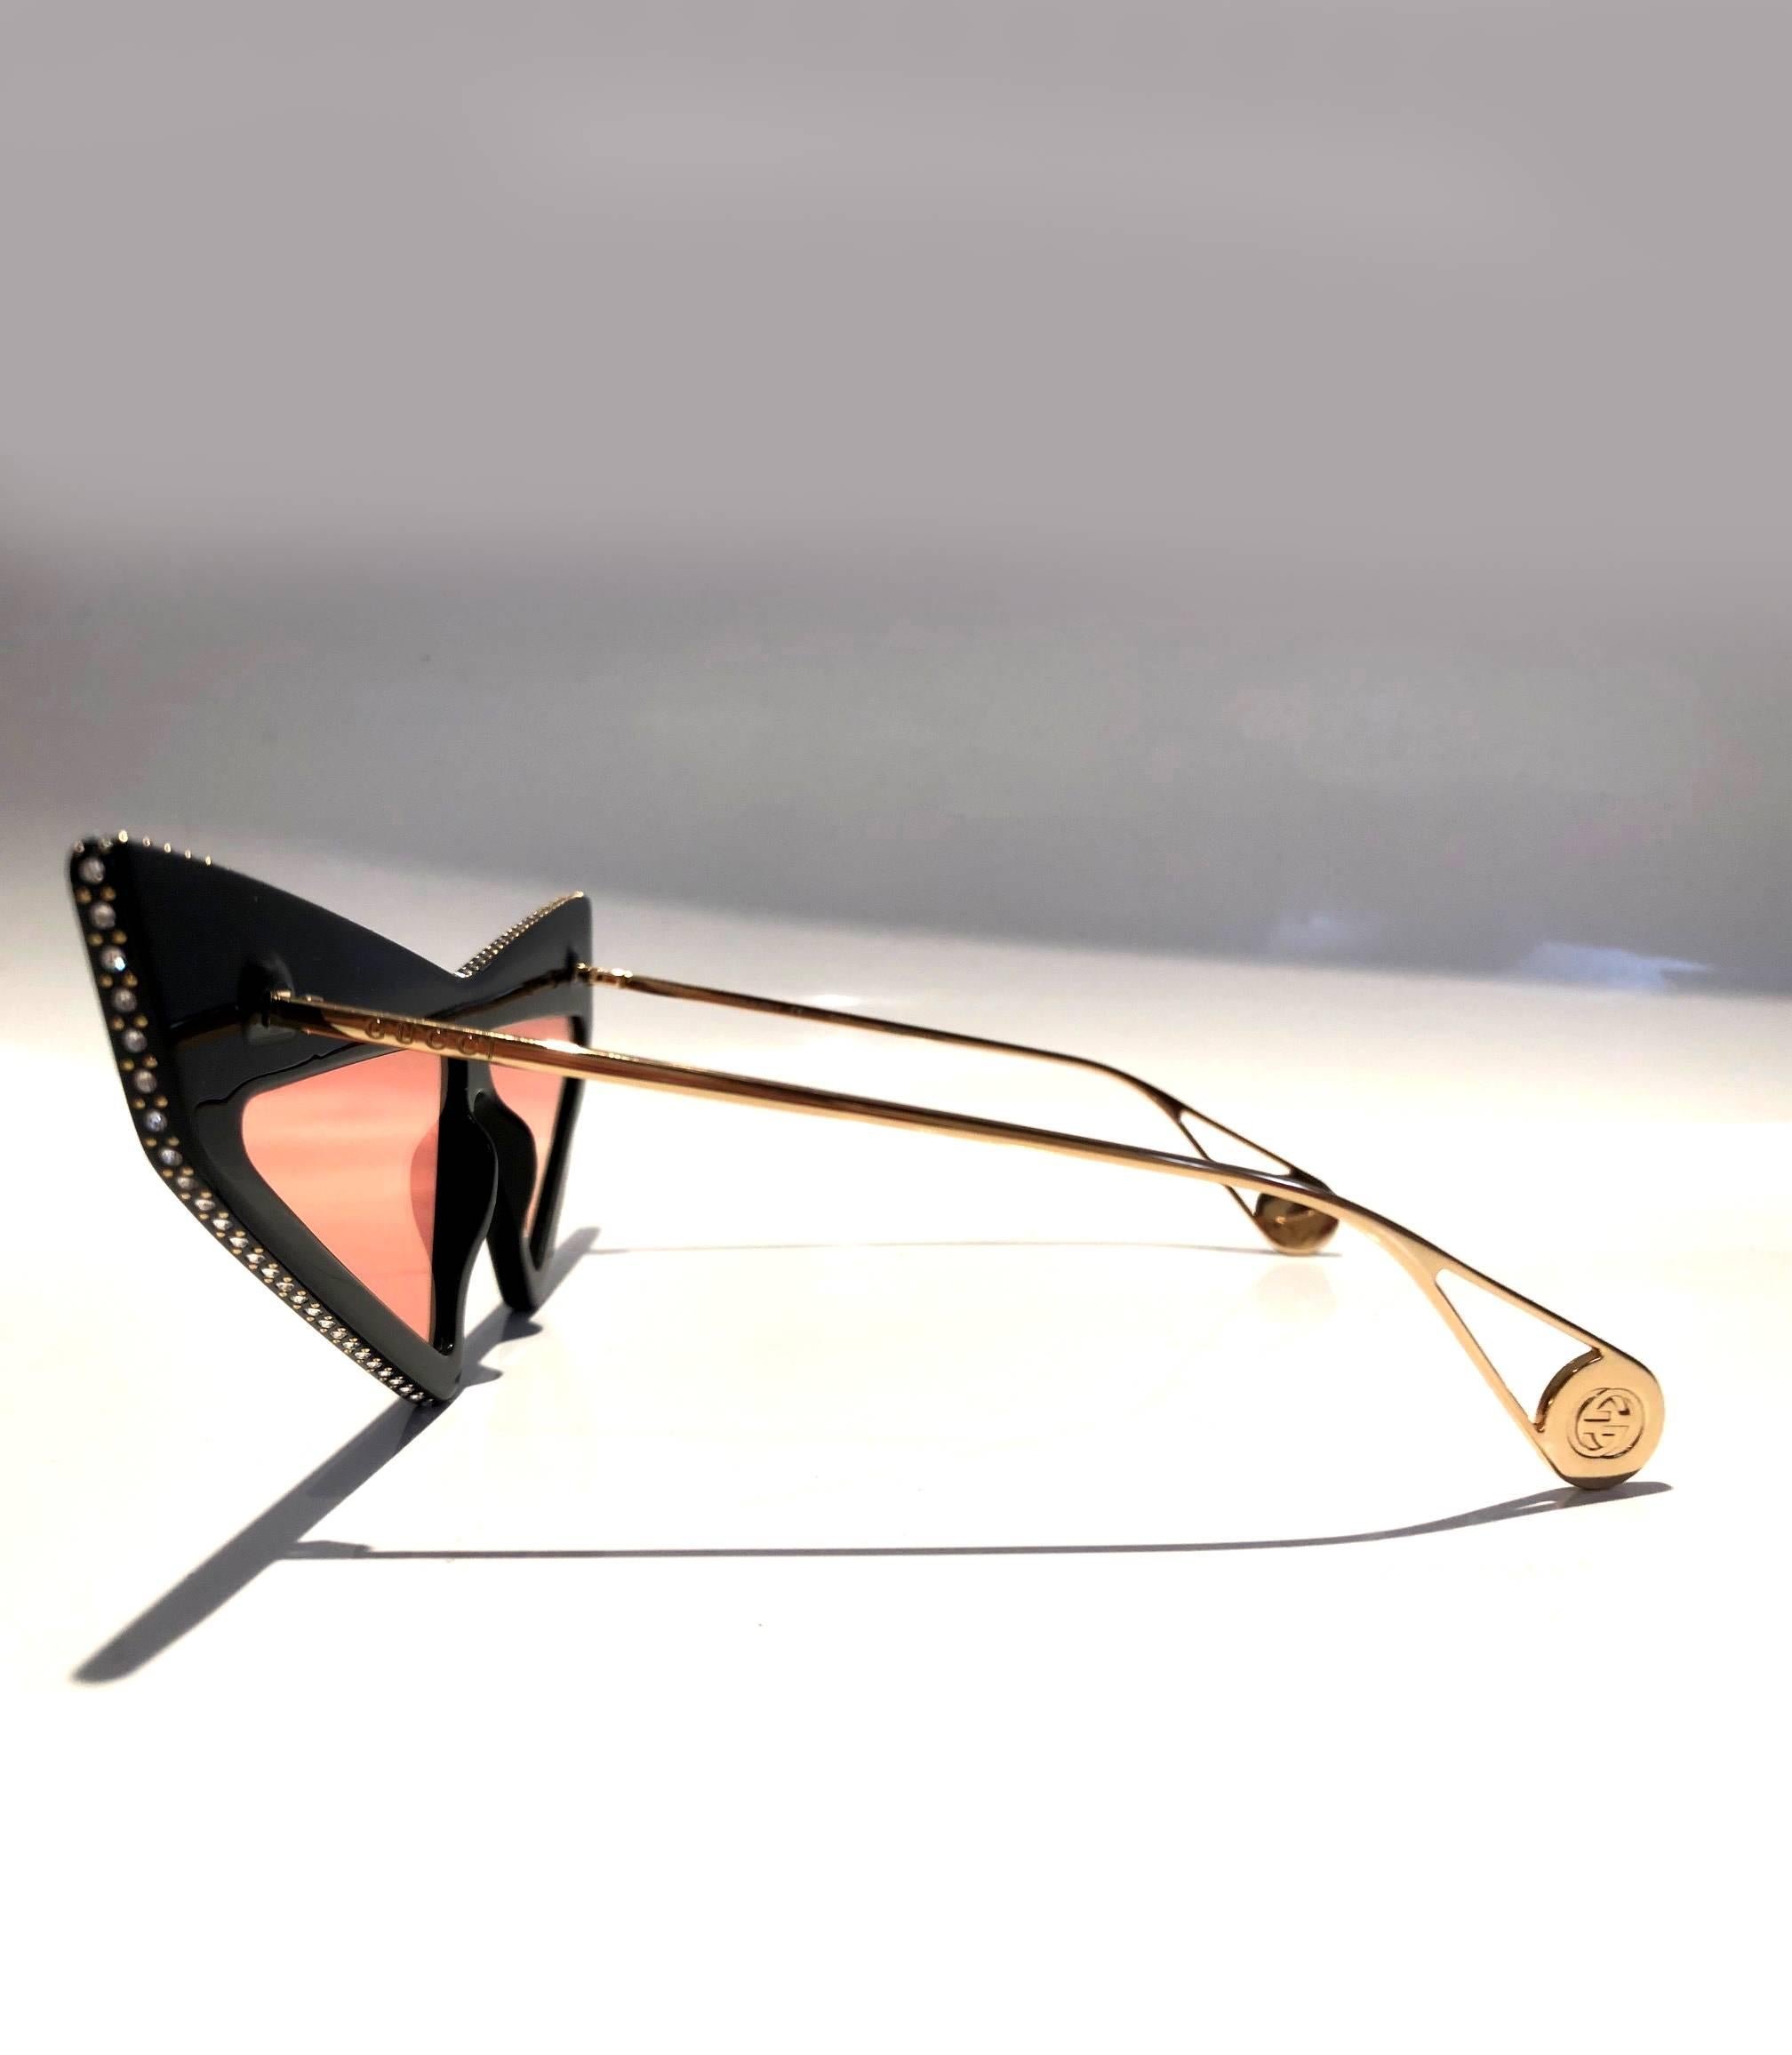 Gucci GG0430S 001 70 sunglasses feature an over exaggerated geometric cat eye frame, black frame, orange/pink lenses, these premium Havana acetate sunglasses are embellished with crystal Swarovski on the profile and feature stylish gold coated arms.